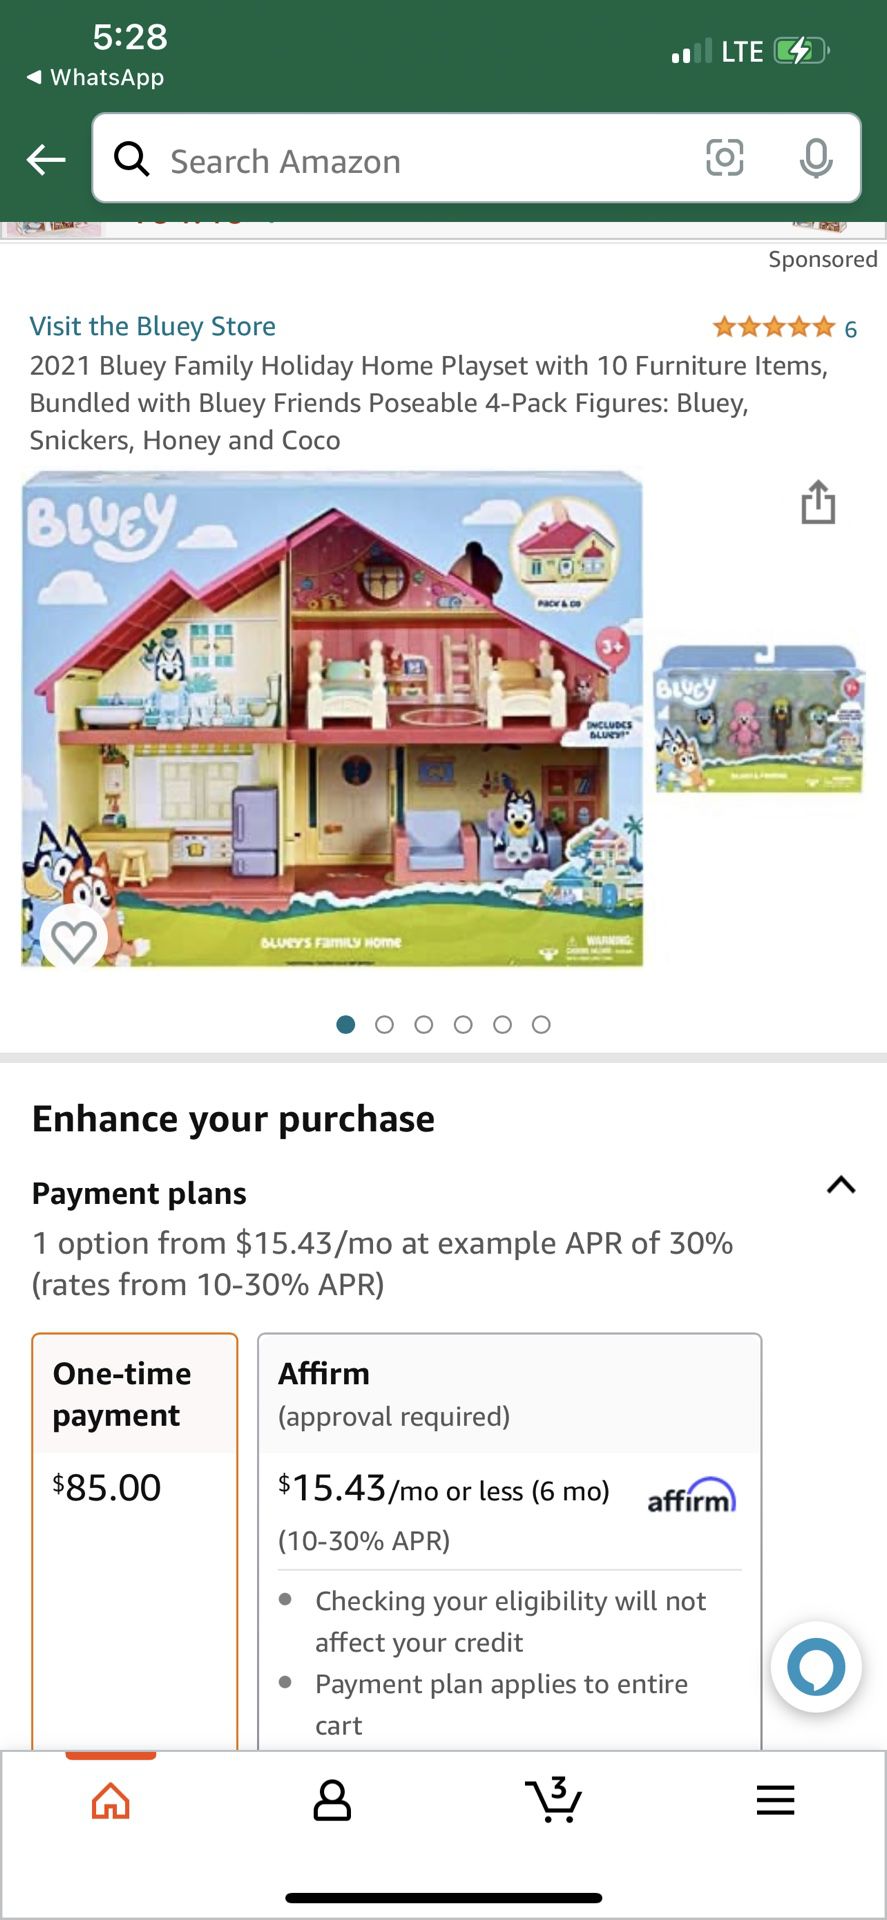 2021 Bluey Family Holiday Home Playset with 10 Furniture Items, Bundled with Bluey Friends Poseable 4-Pack Figures: Bluey, Snickers, Honey and Coco  2